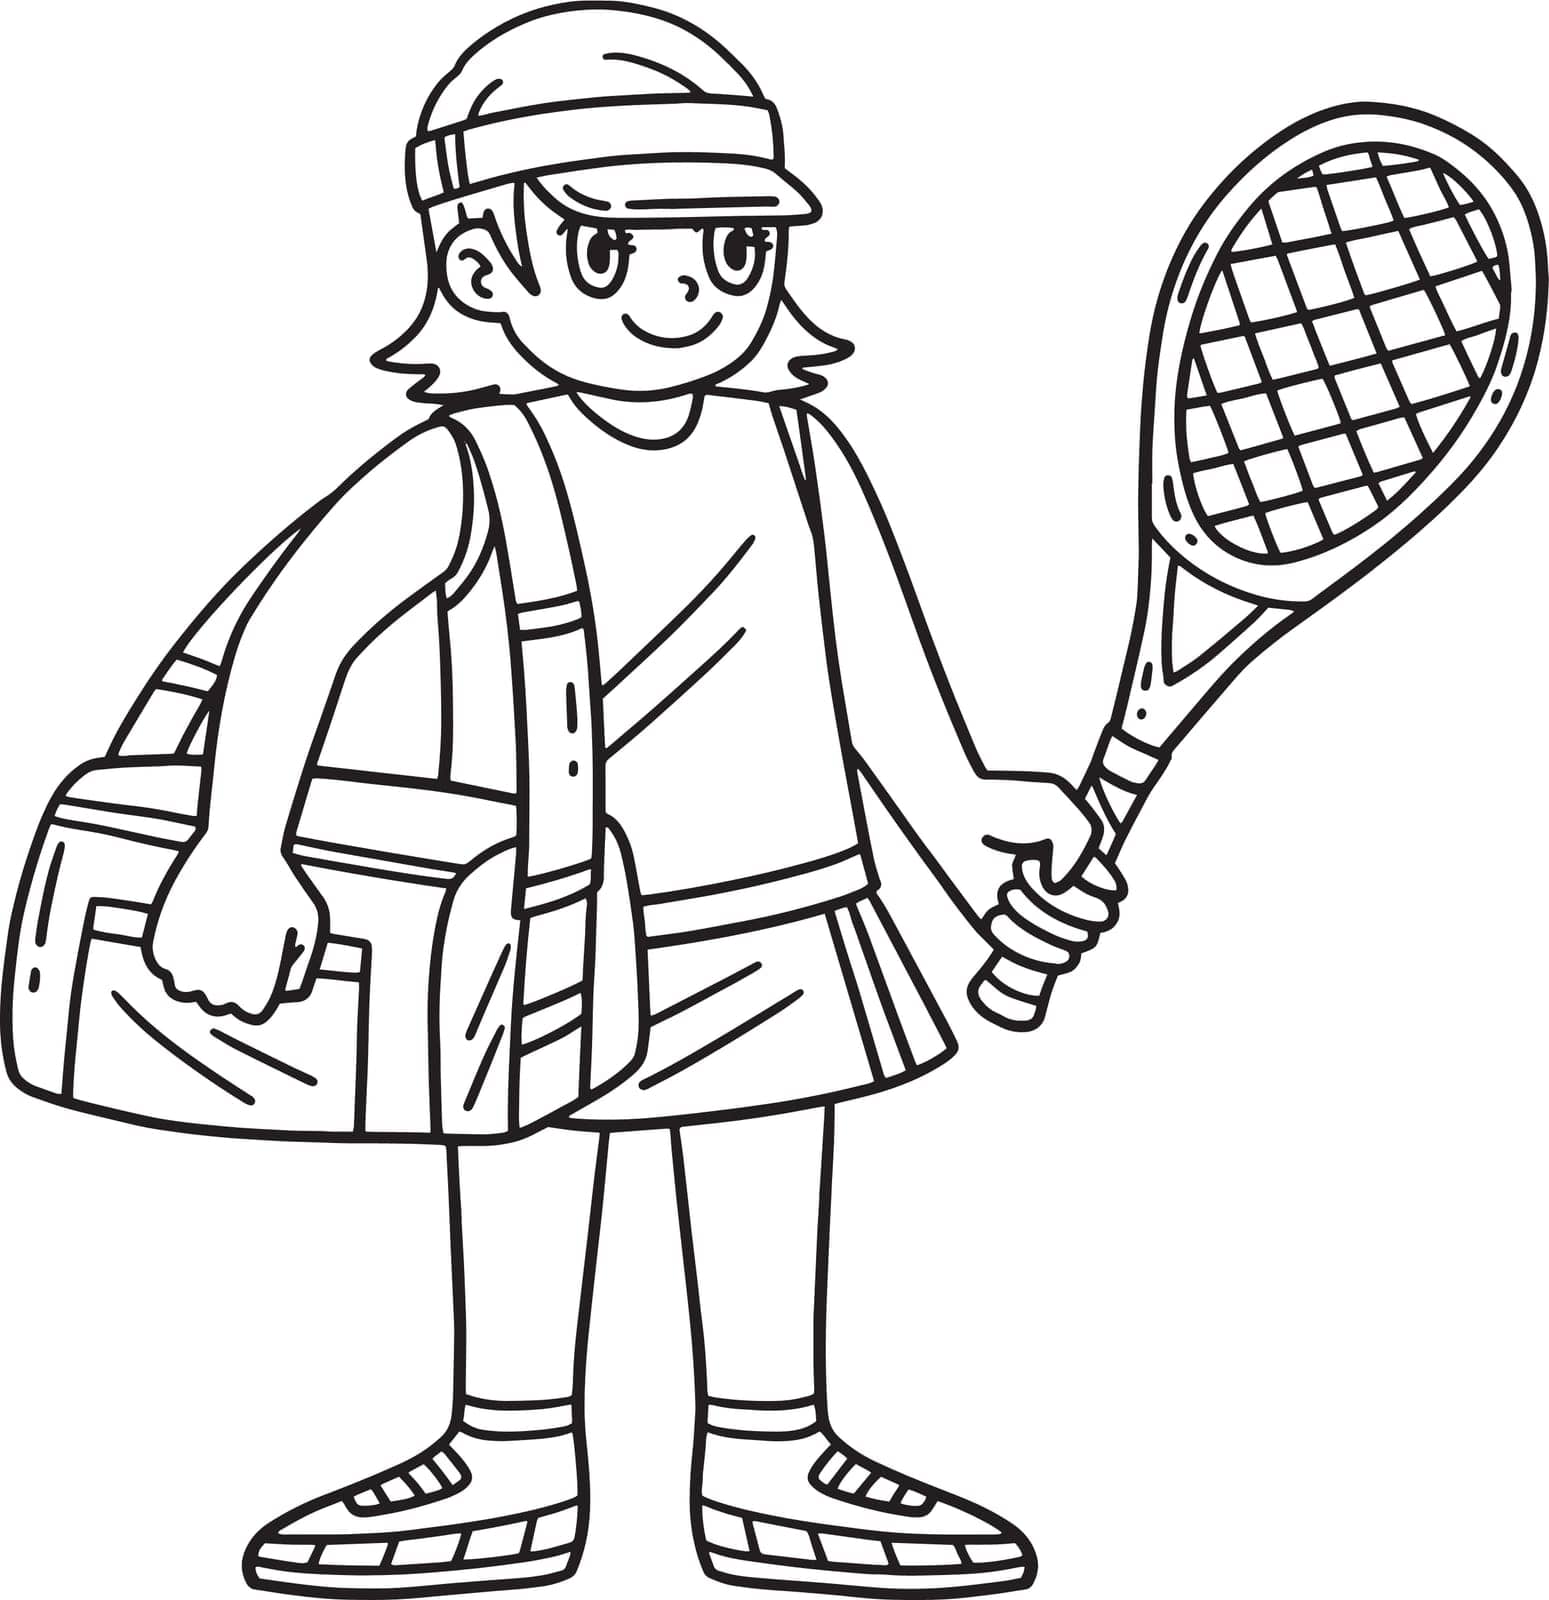 A cute and funny coloring page of a Tennis Female Player with a Bag and Racket. Provides hours of coloring fun for children. To color, this page is very easy. Suitable for little kids and toddlers.